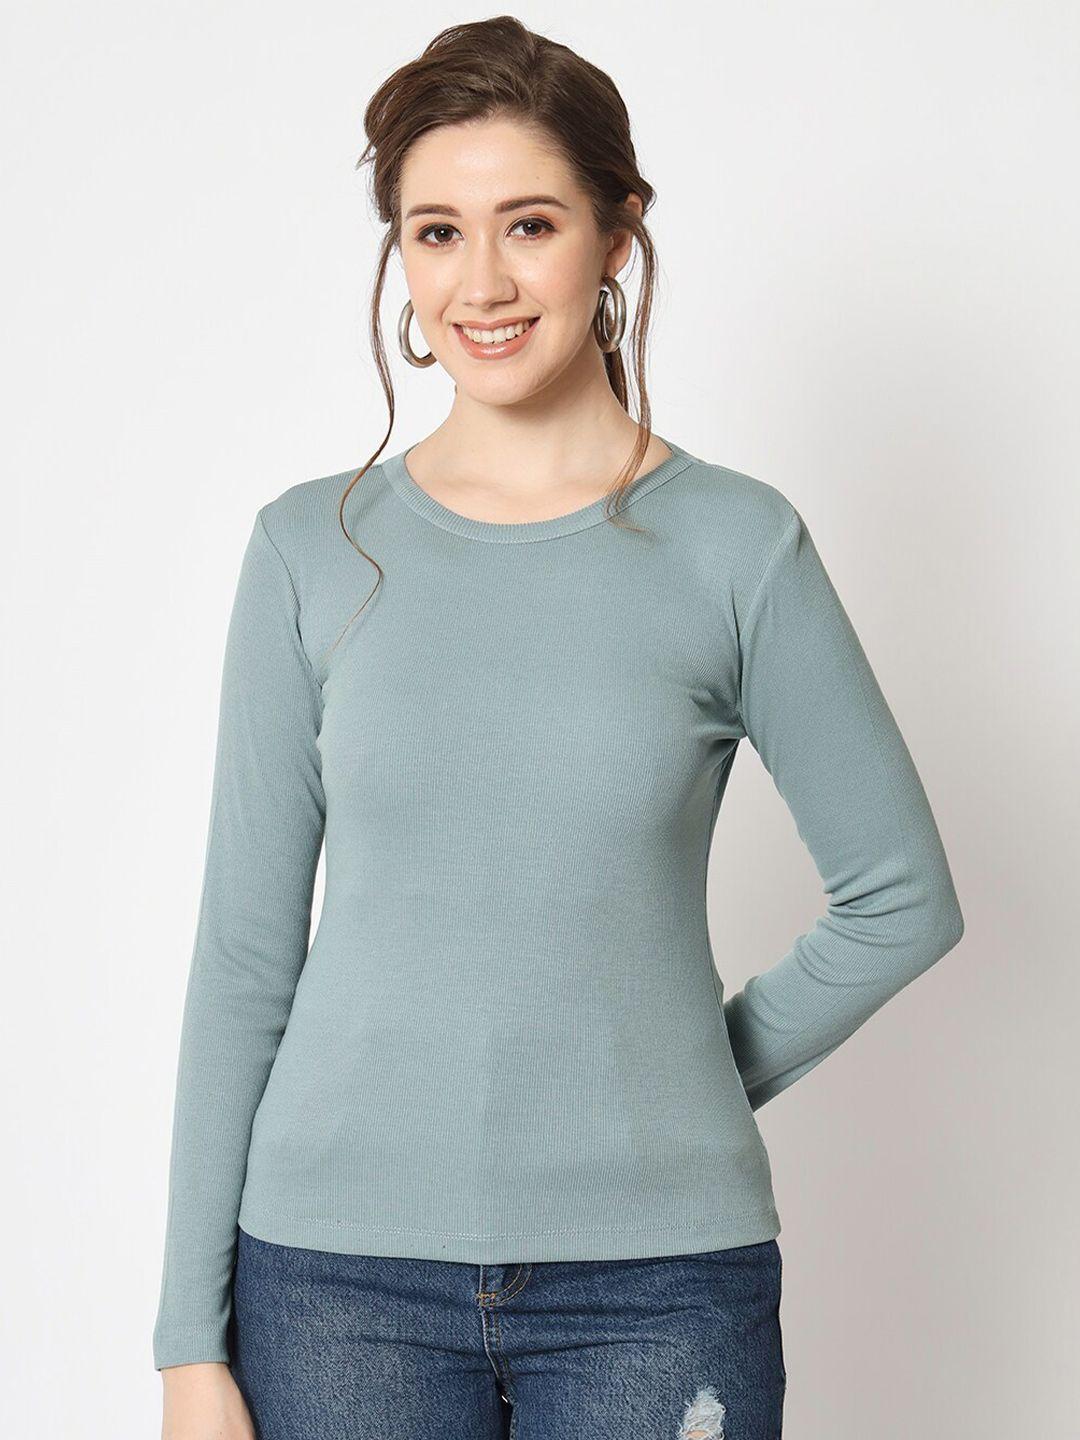 charmgal round neck long sleeves liva top